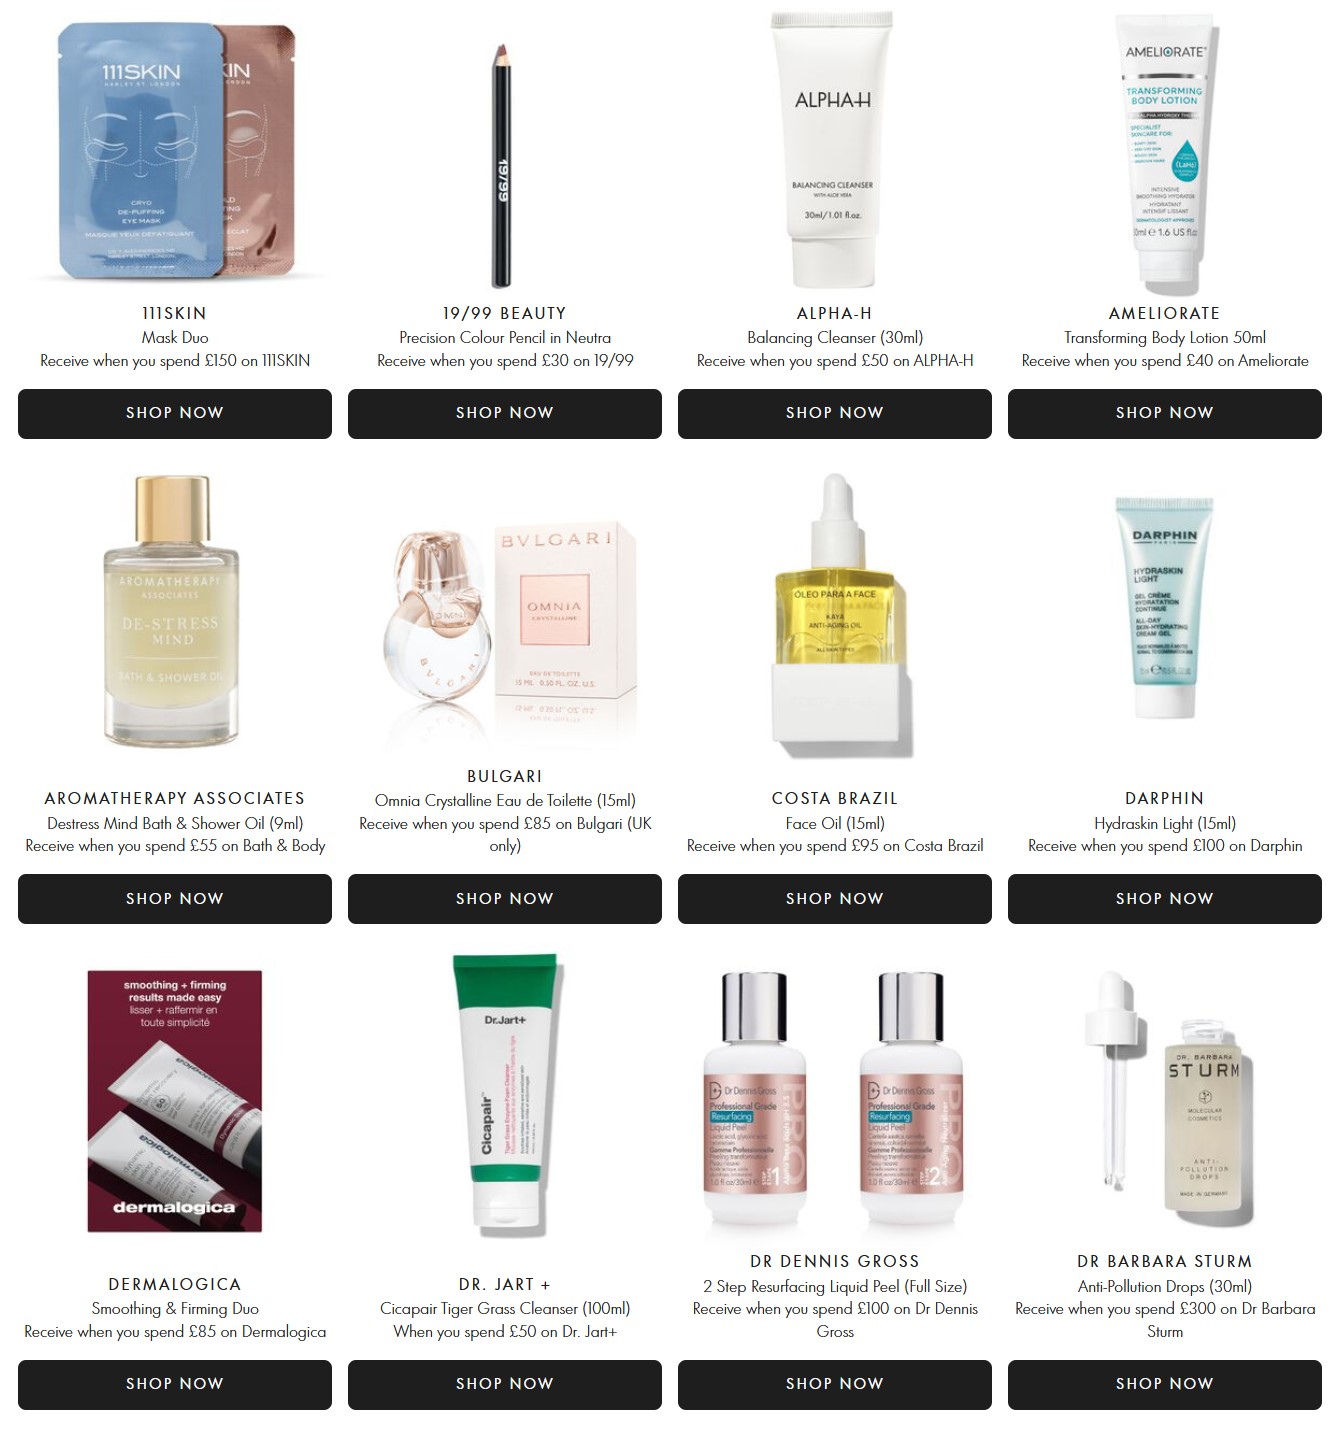 Gift with purchase offers at Space NK